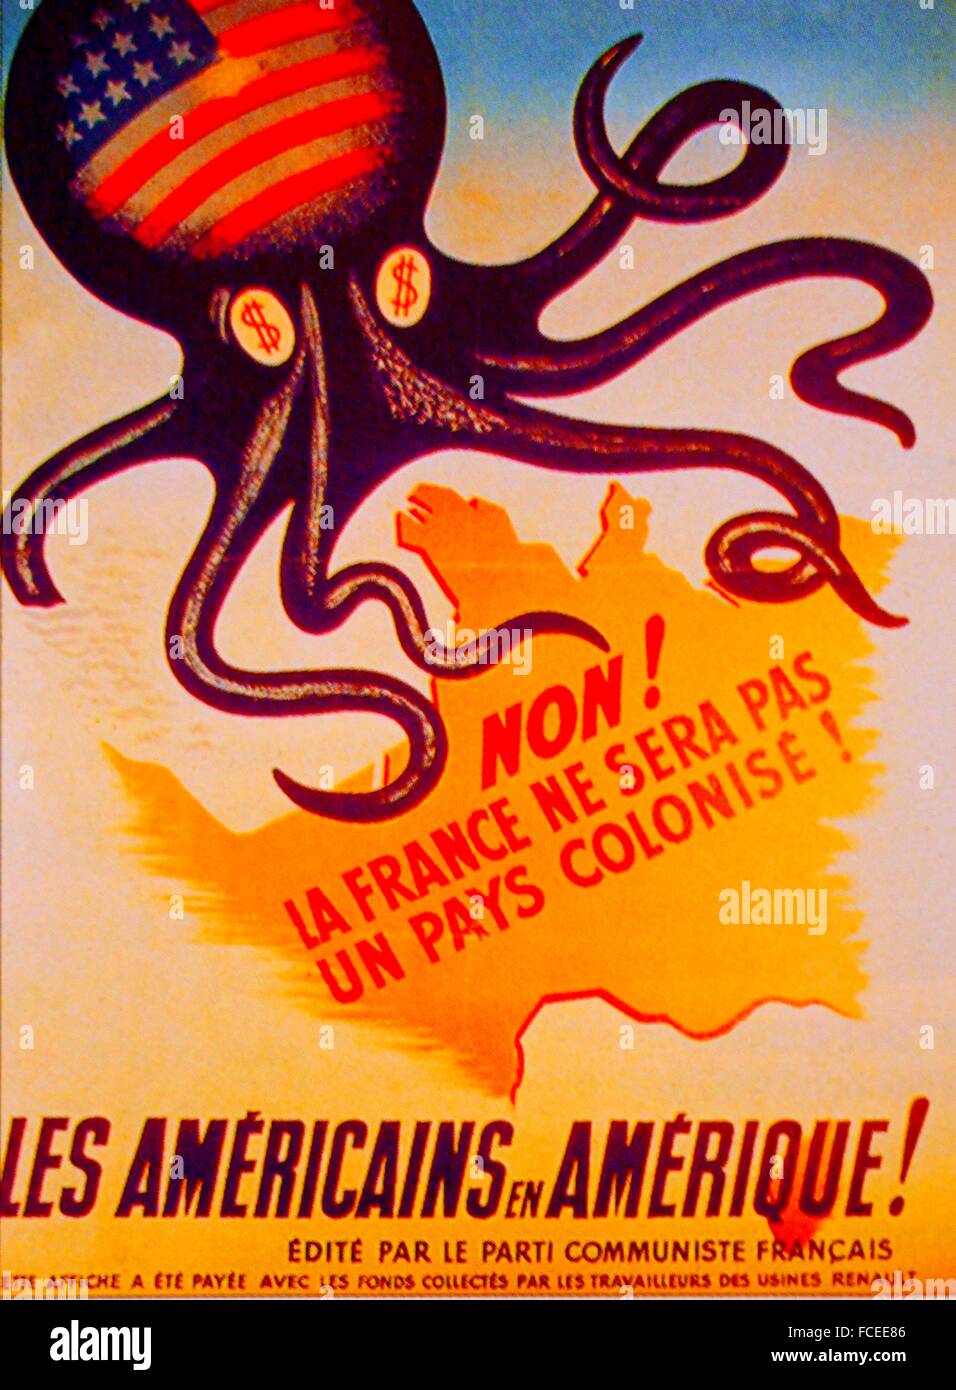 France.  Poster of the PCF ( Parti Communiste Français) agains the 'Marshall Plan'. (Americans in America.). Stock Photo